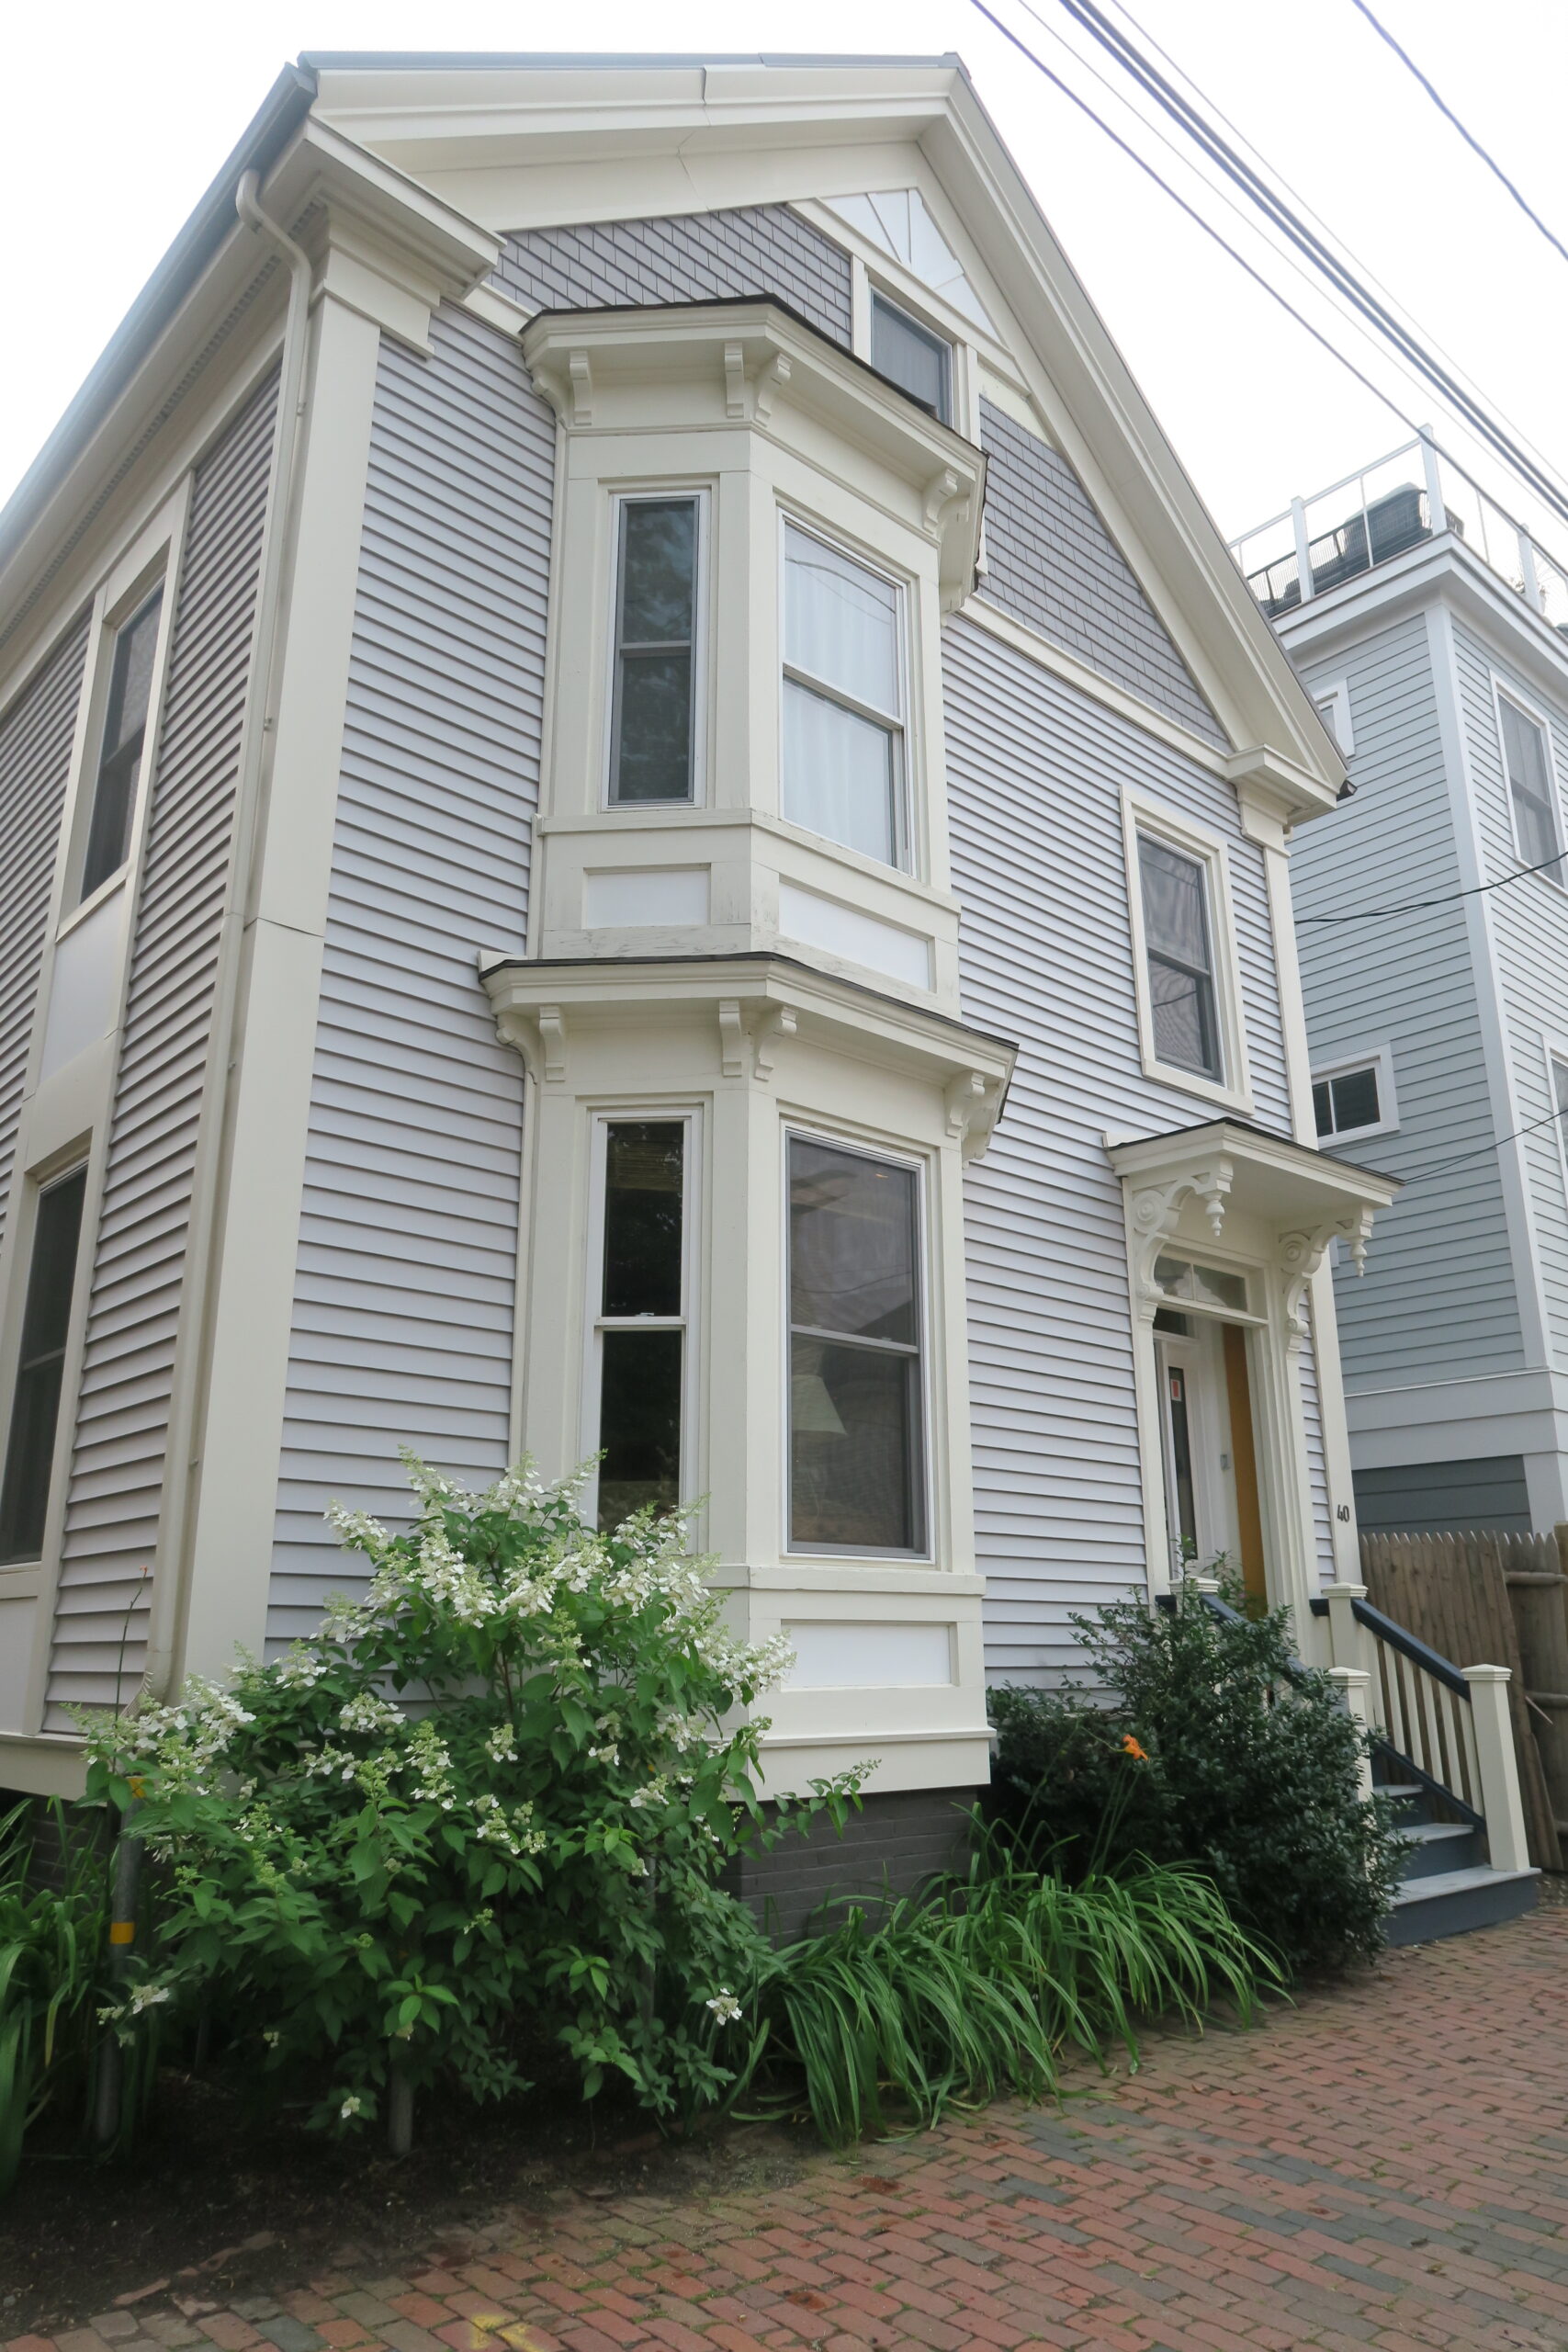 The exterior of Clayton's House located on O'Brion Street in Portland, Maine. The house is light blue with green trim and large green bushes on the front.